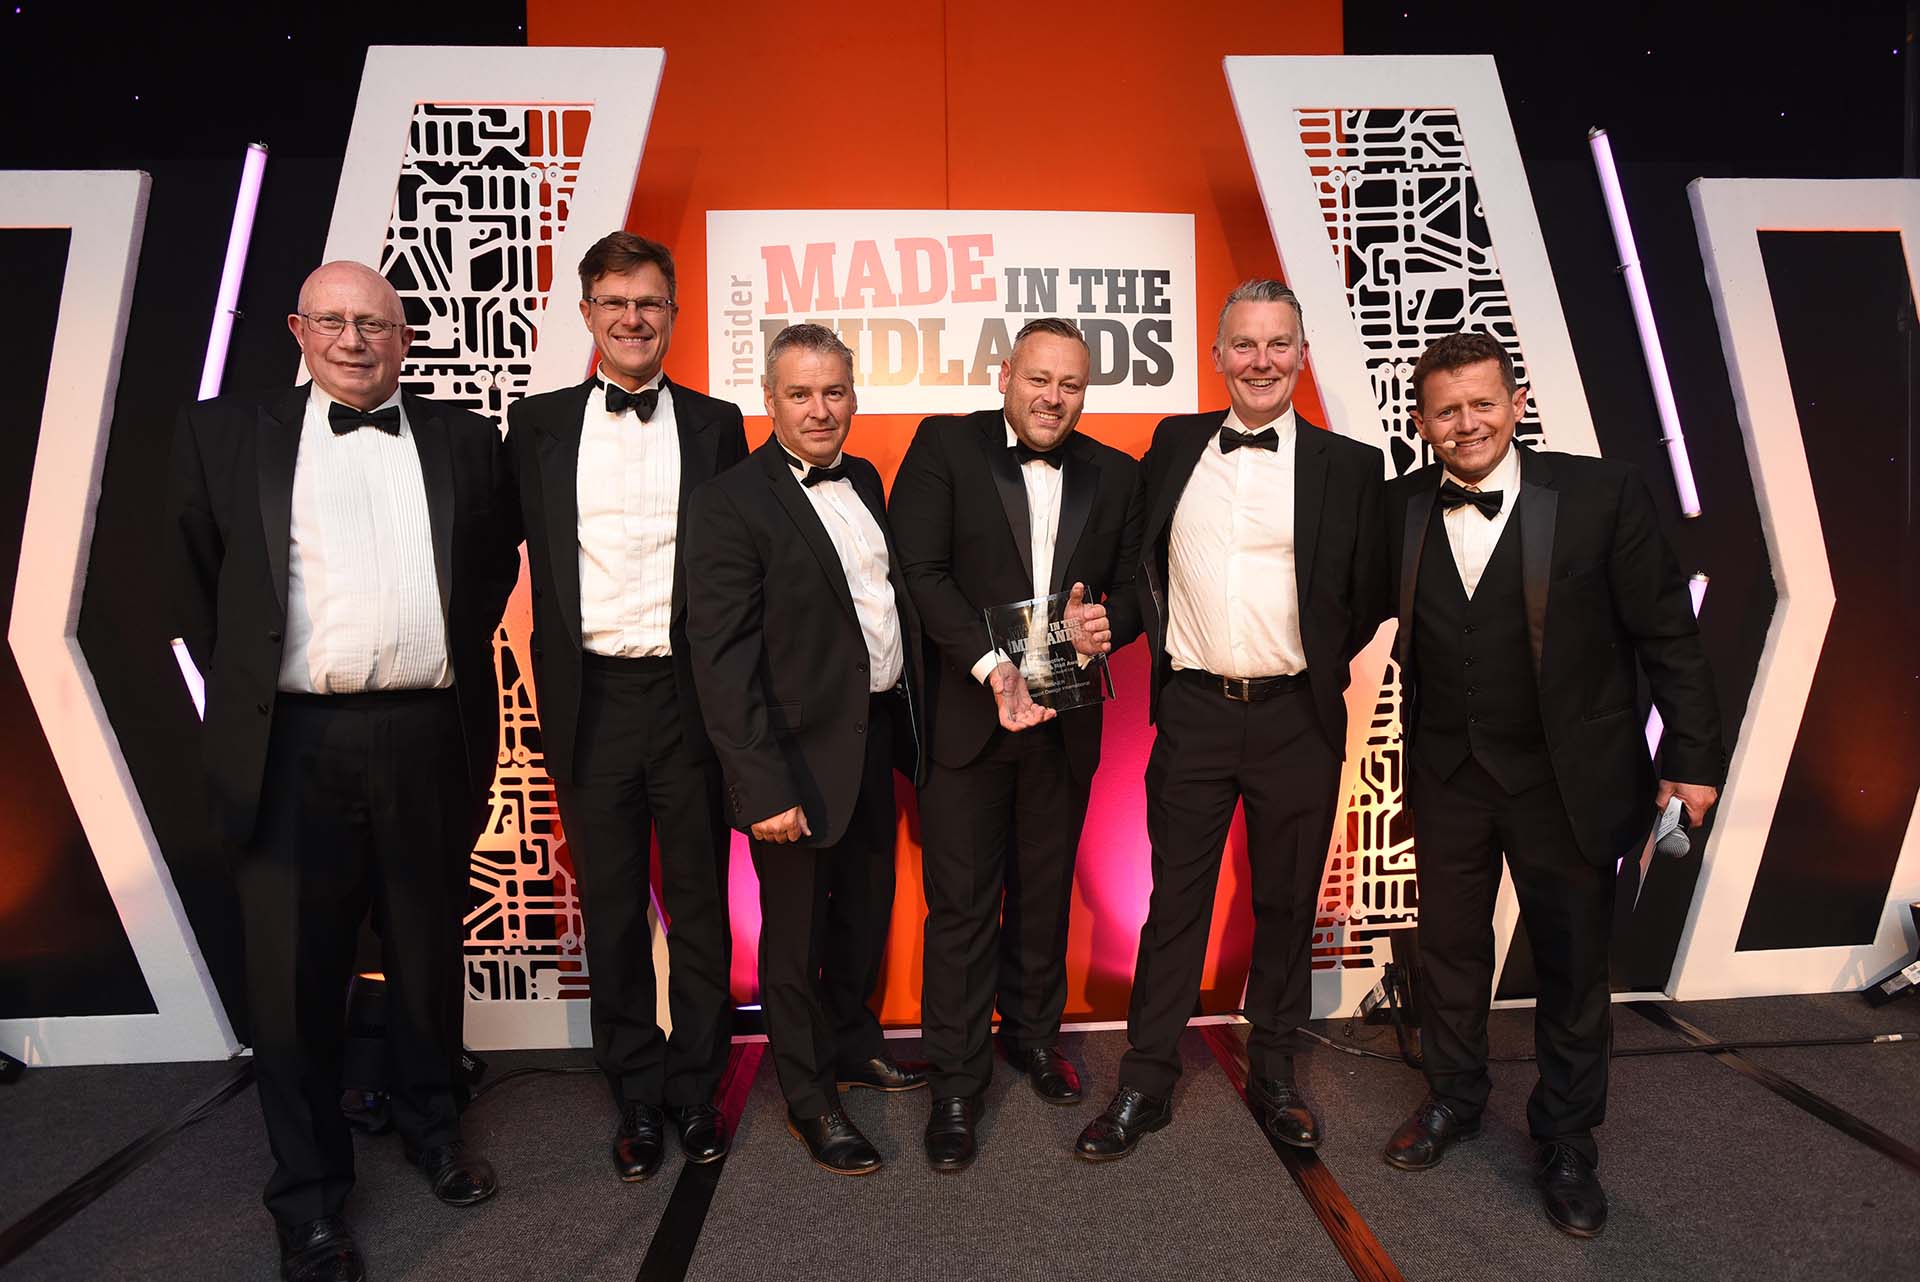 Made in the Midlands Awards winners